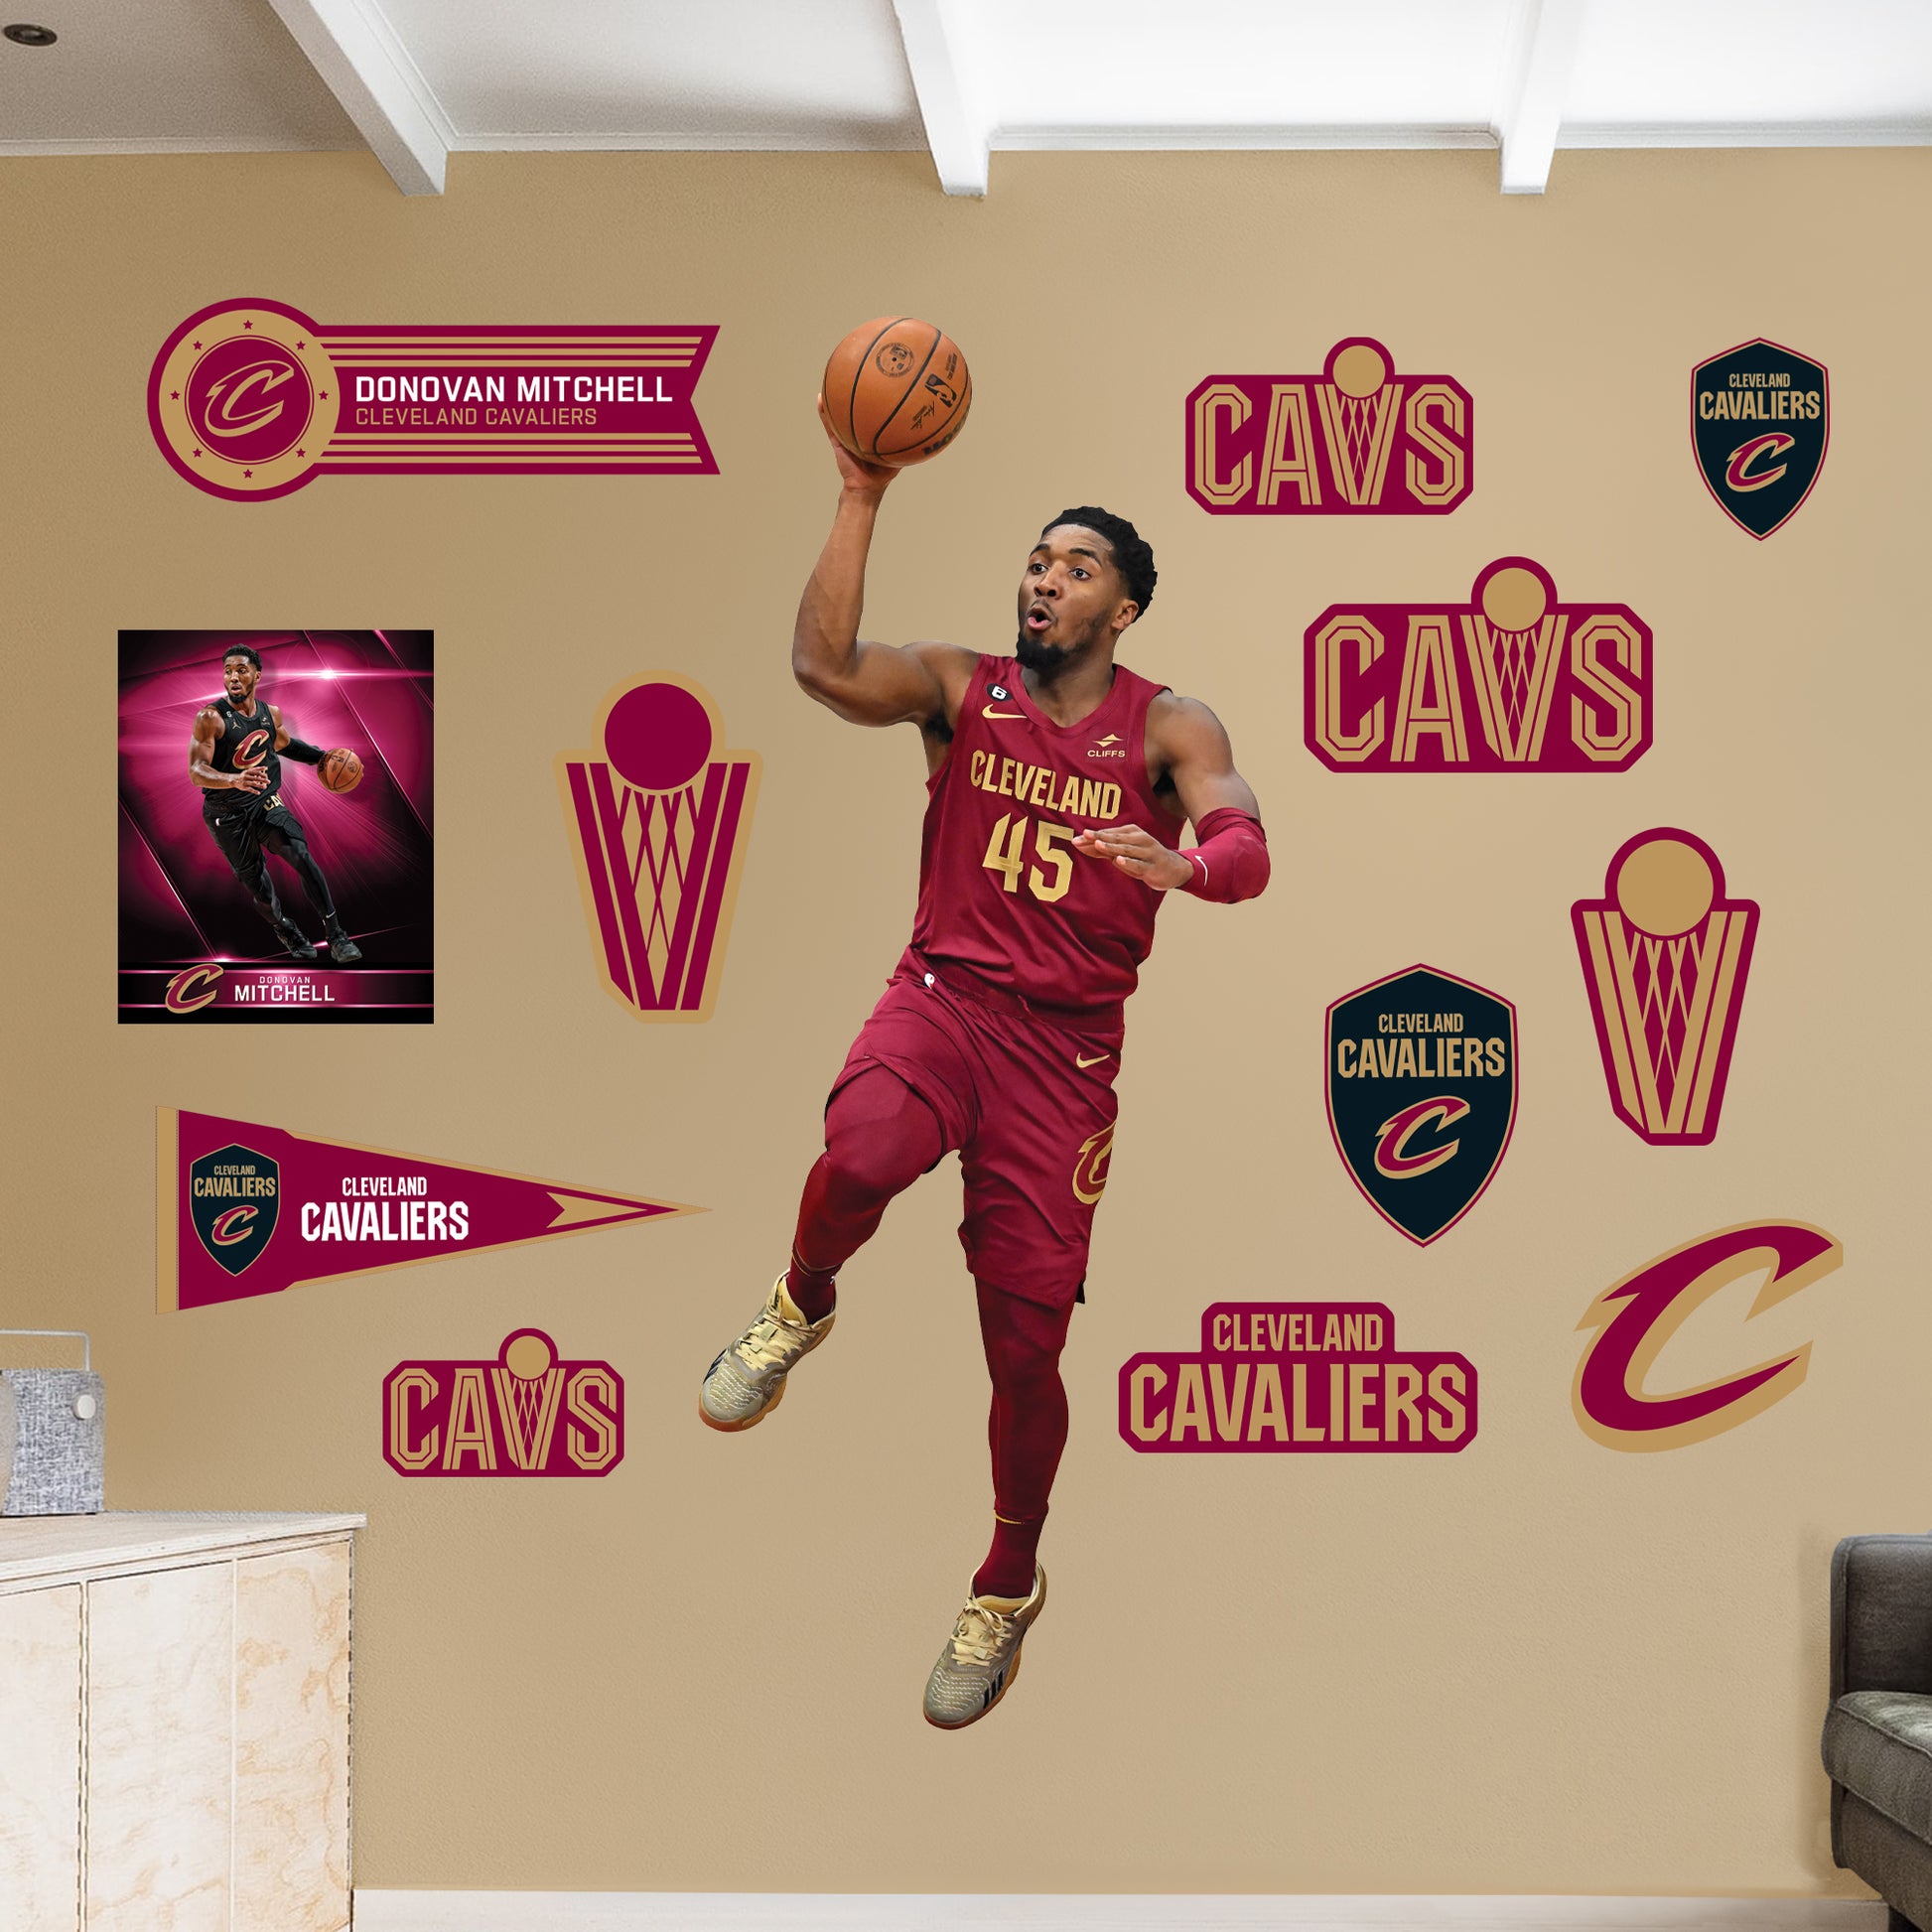 We call that ART. Donovan Mitchell - Cleveland Cavaliers